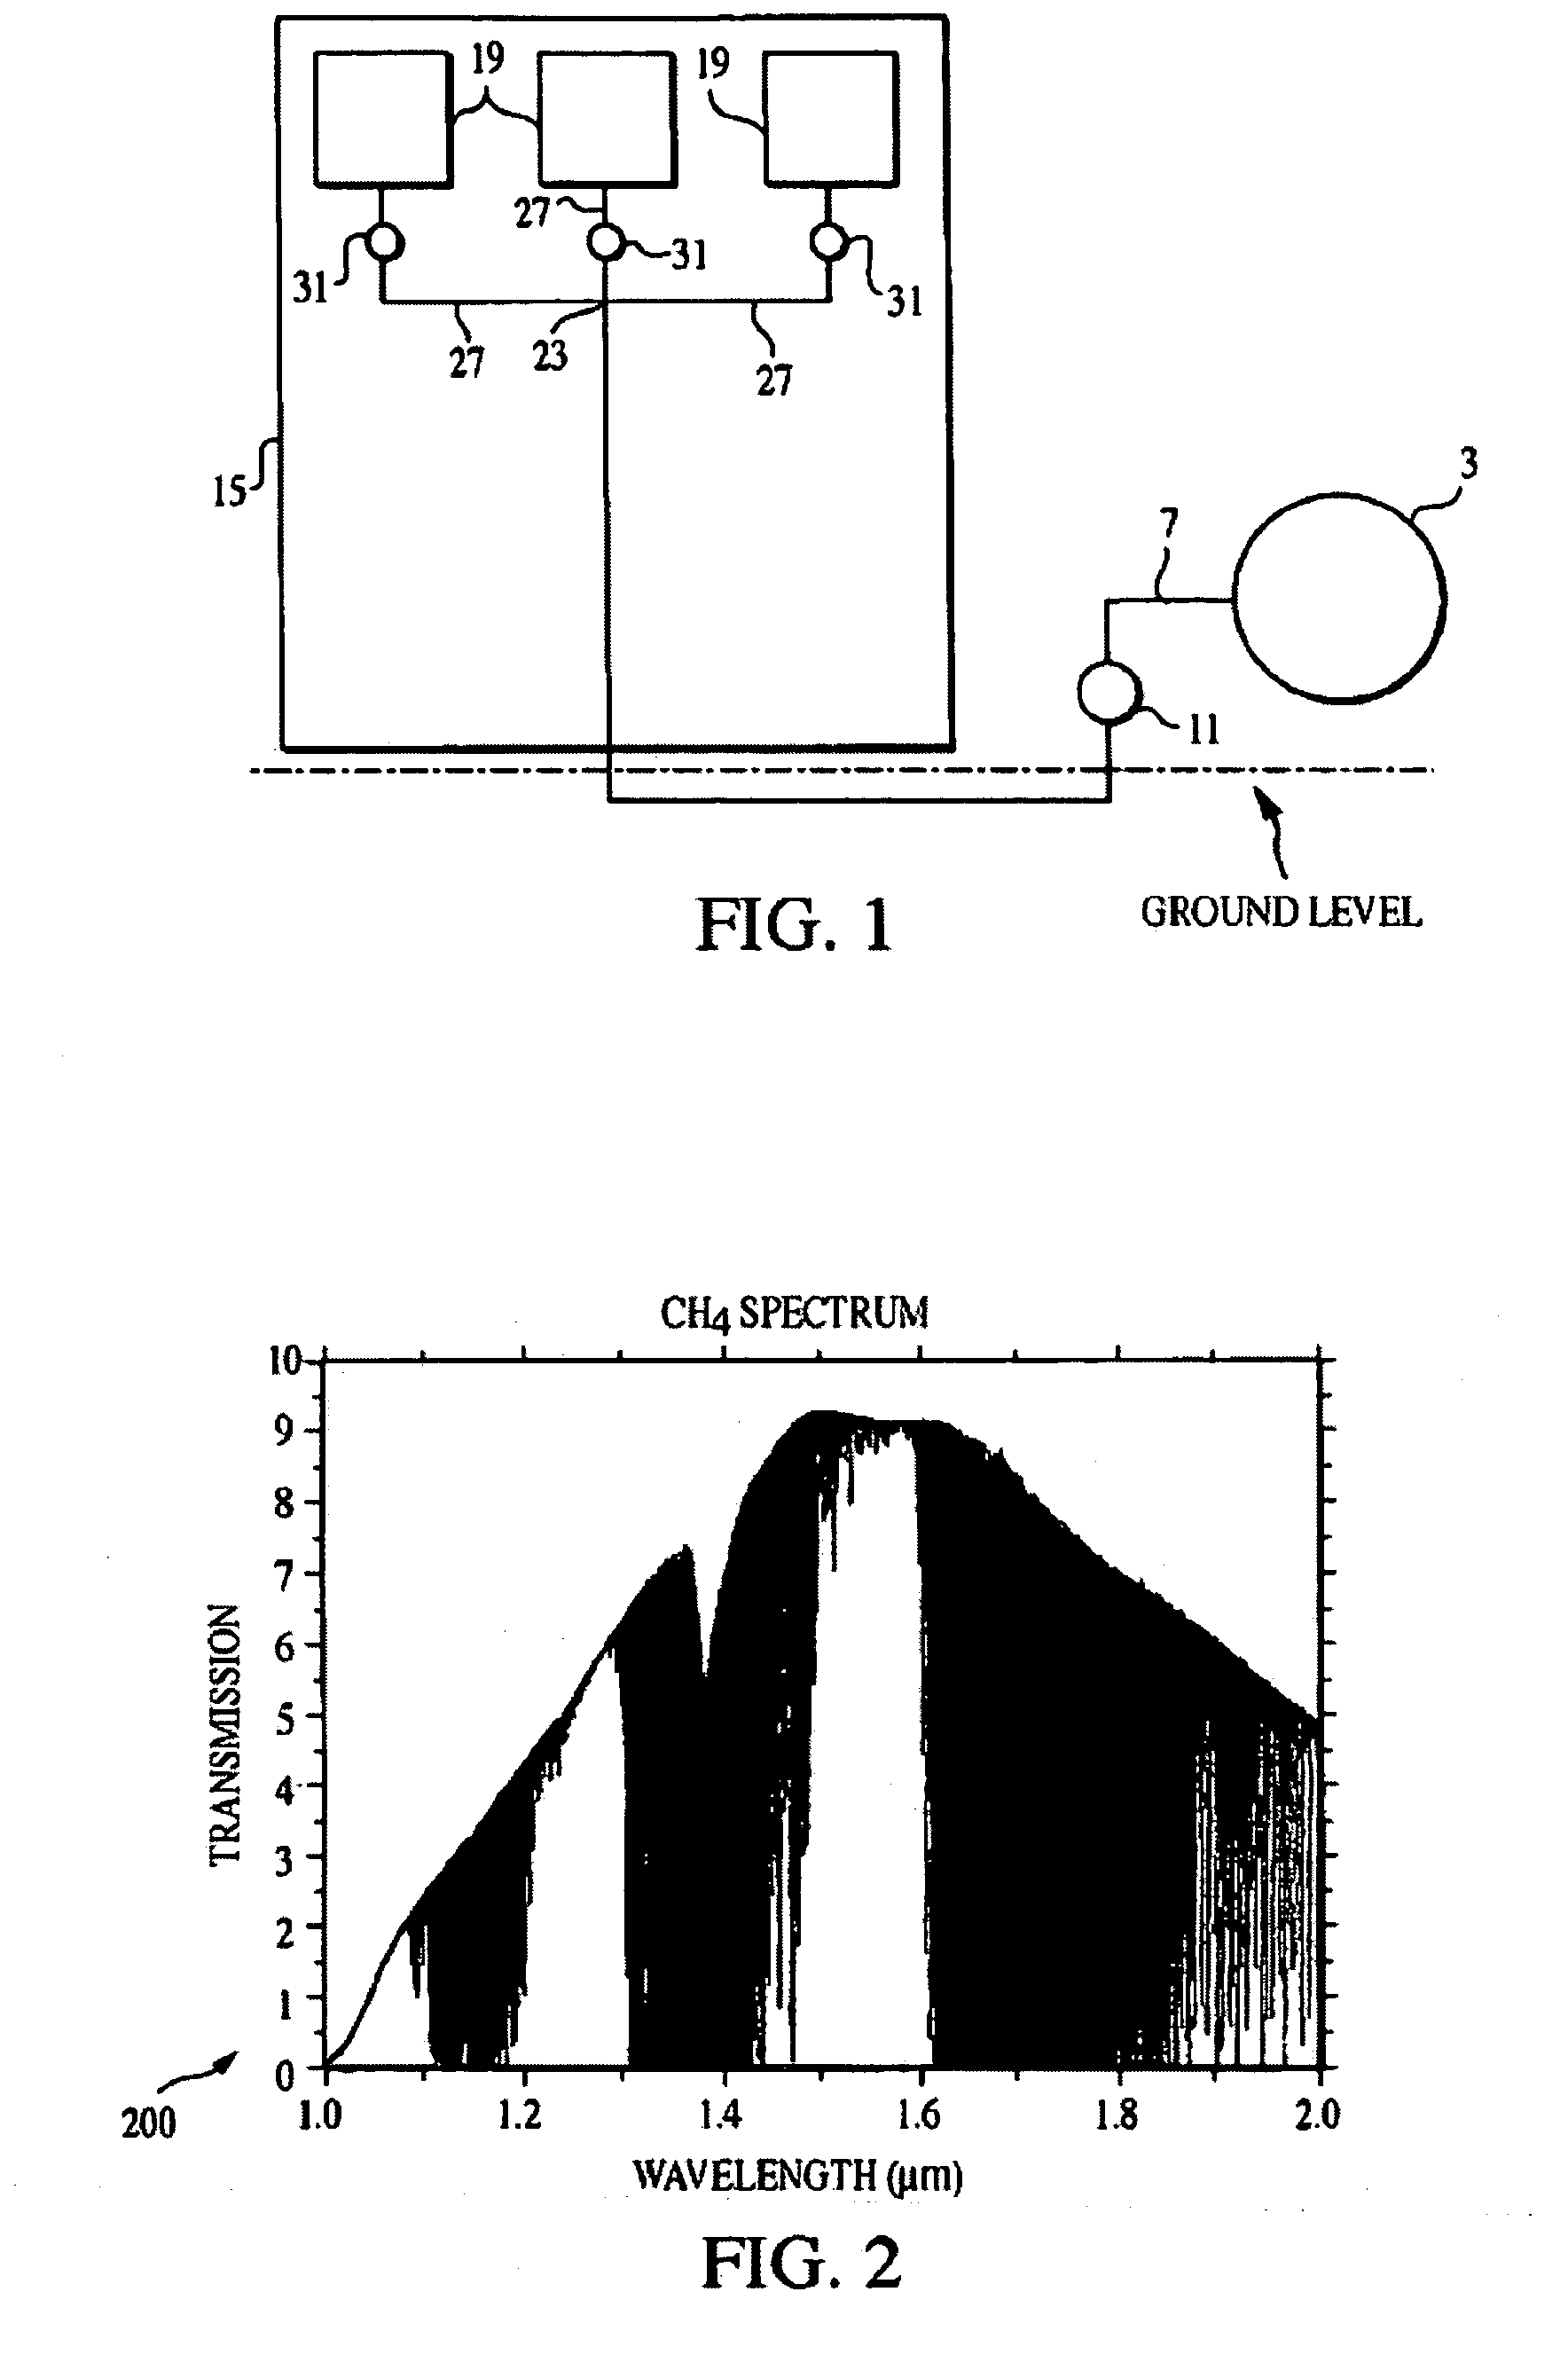 System and method for detecting water vapor within natural gas